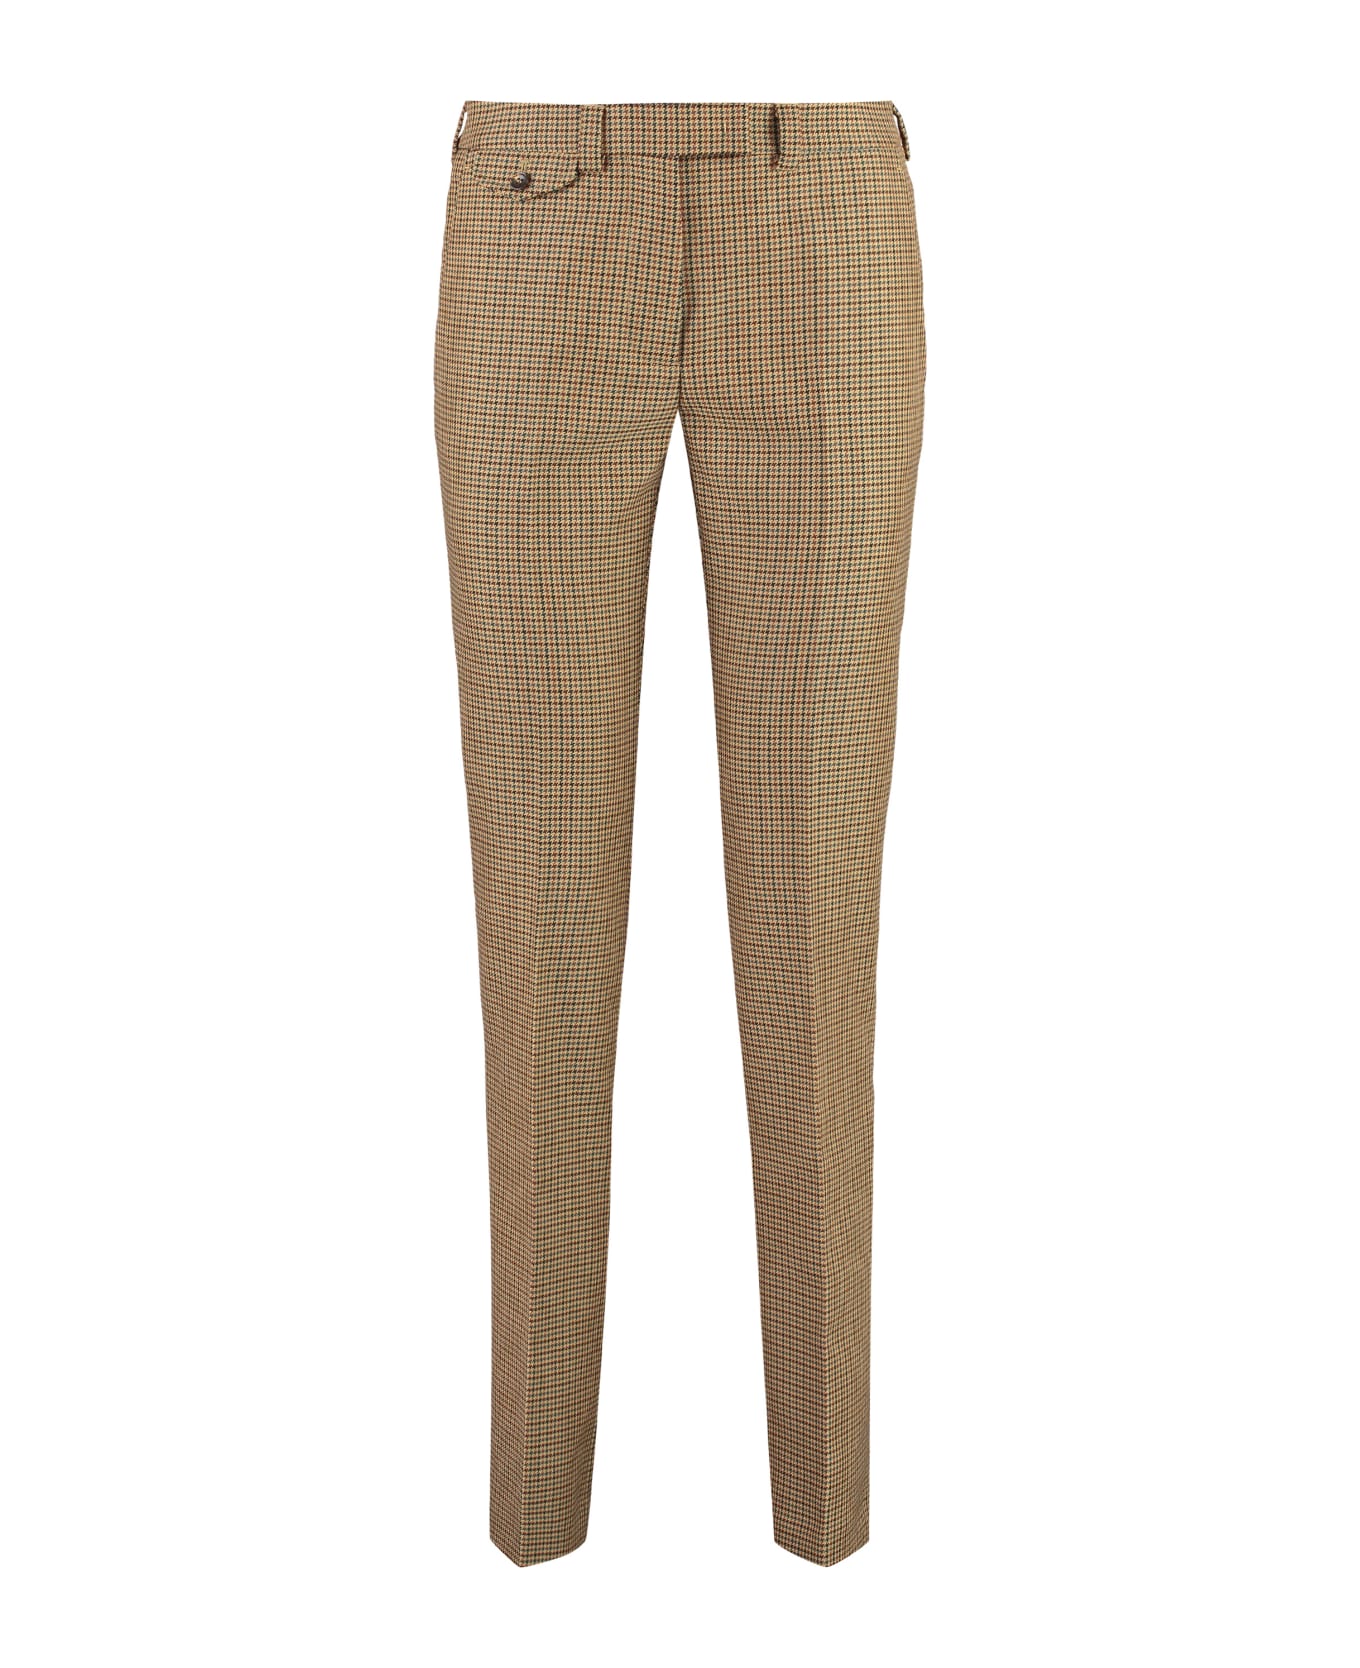 Bally Houndstooth Trousers - Camel ボトムス